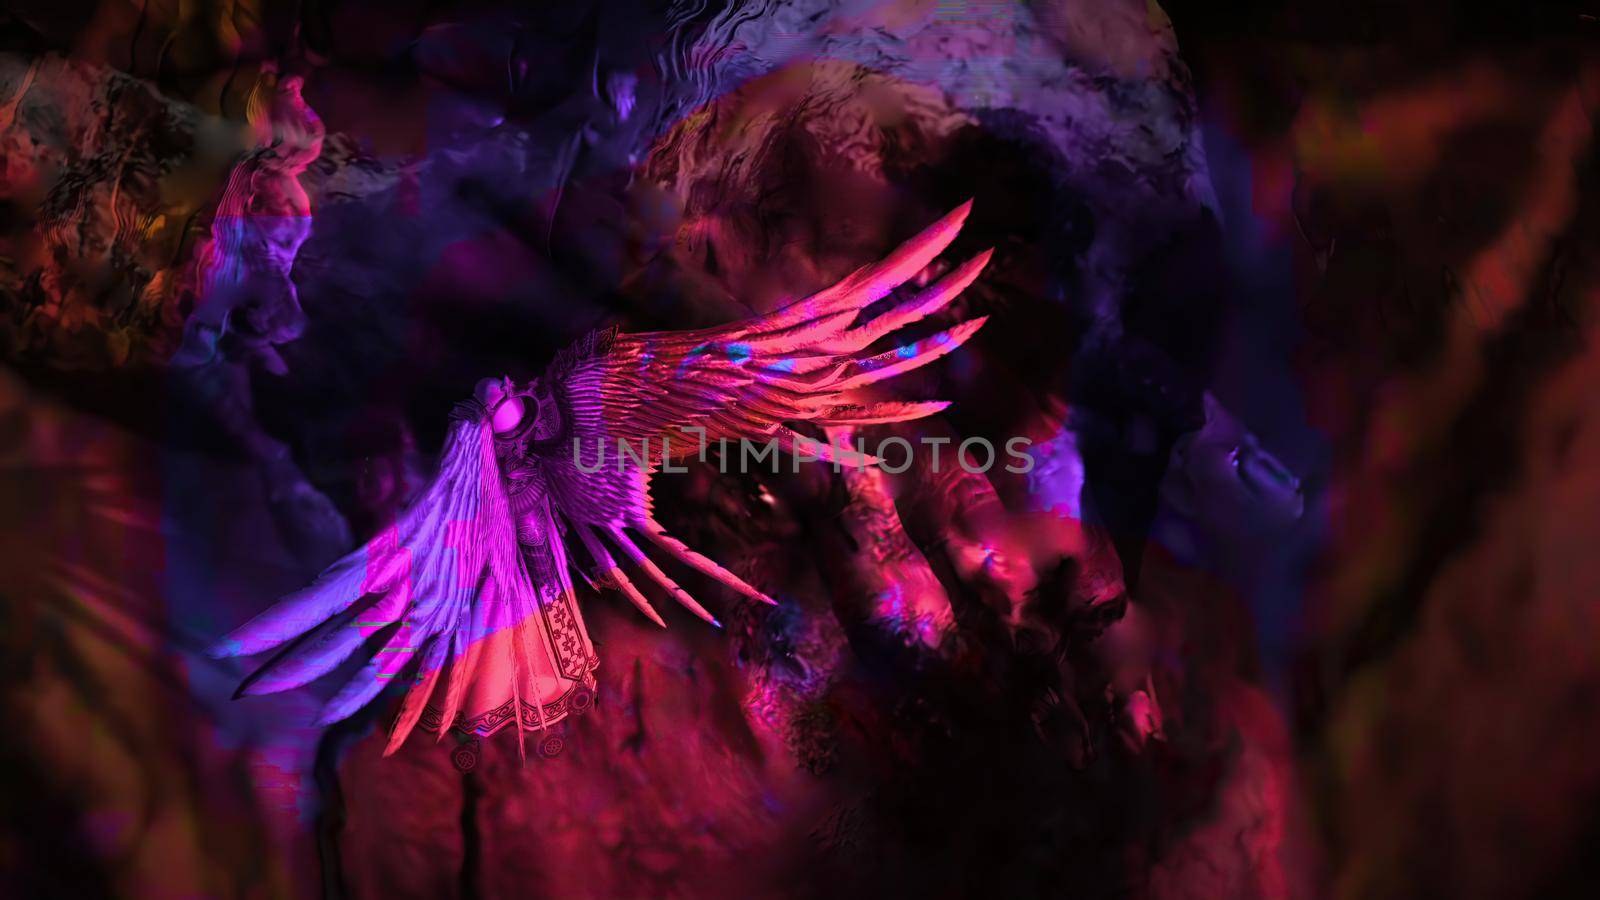 3d illustration - Angel of death with swords in hands